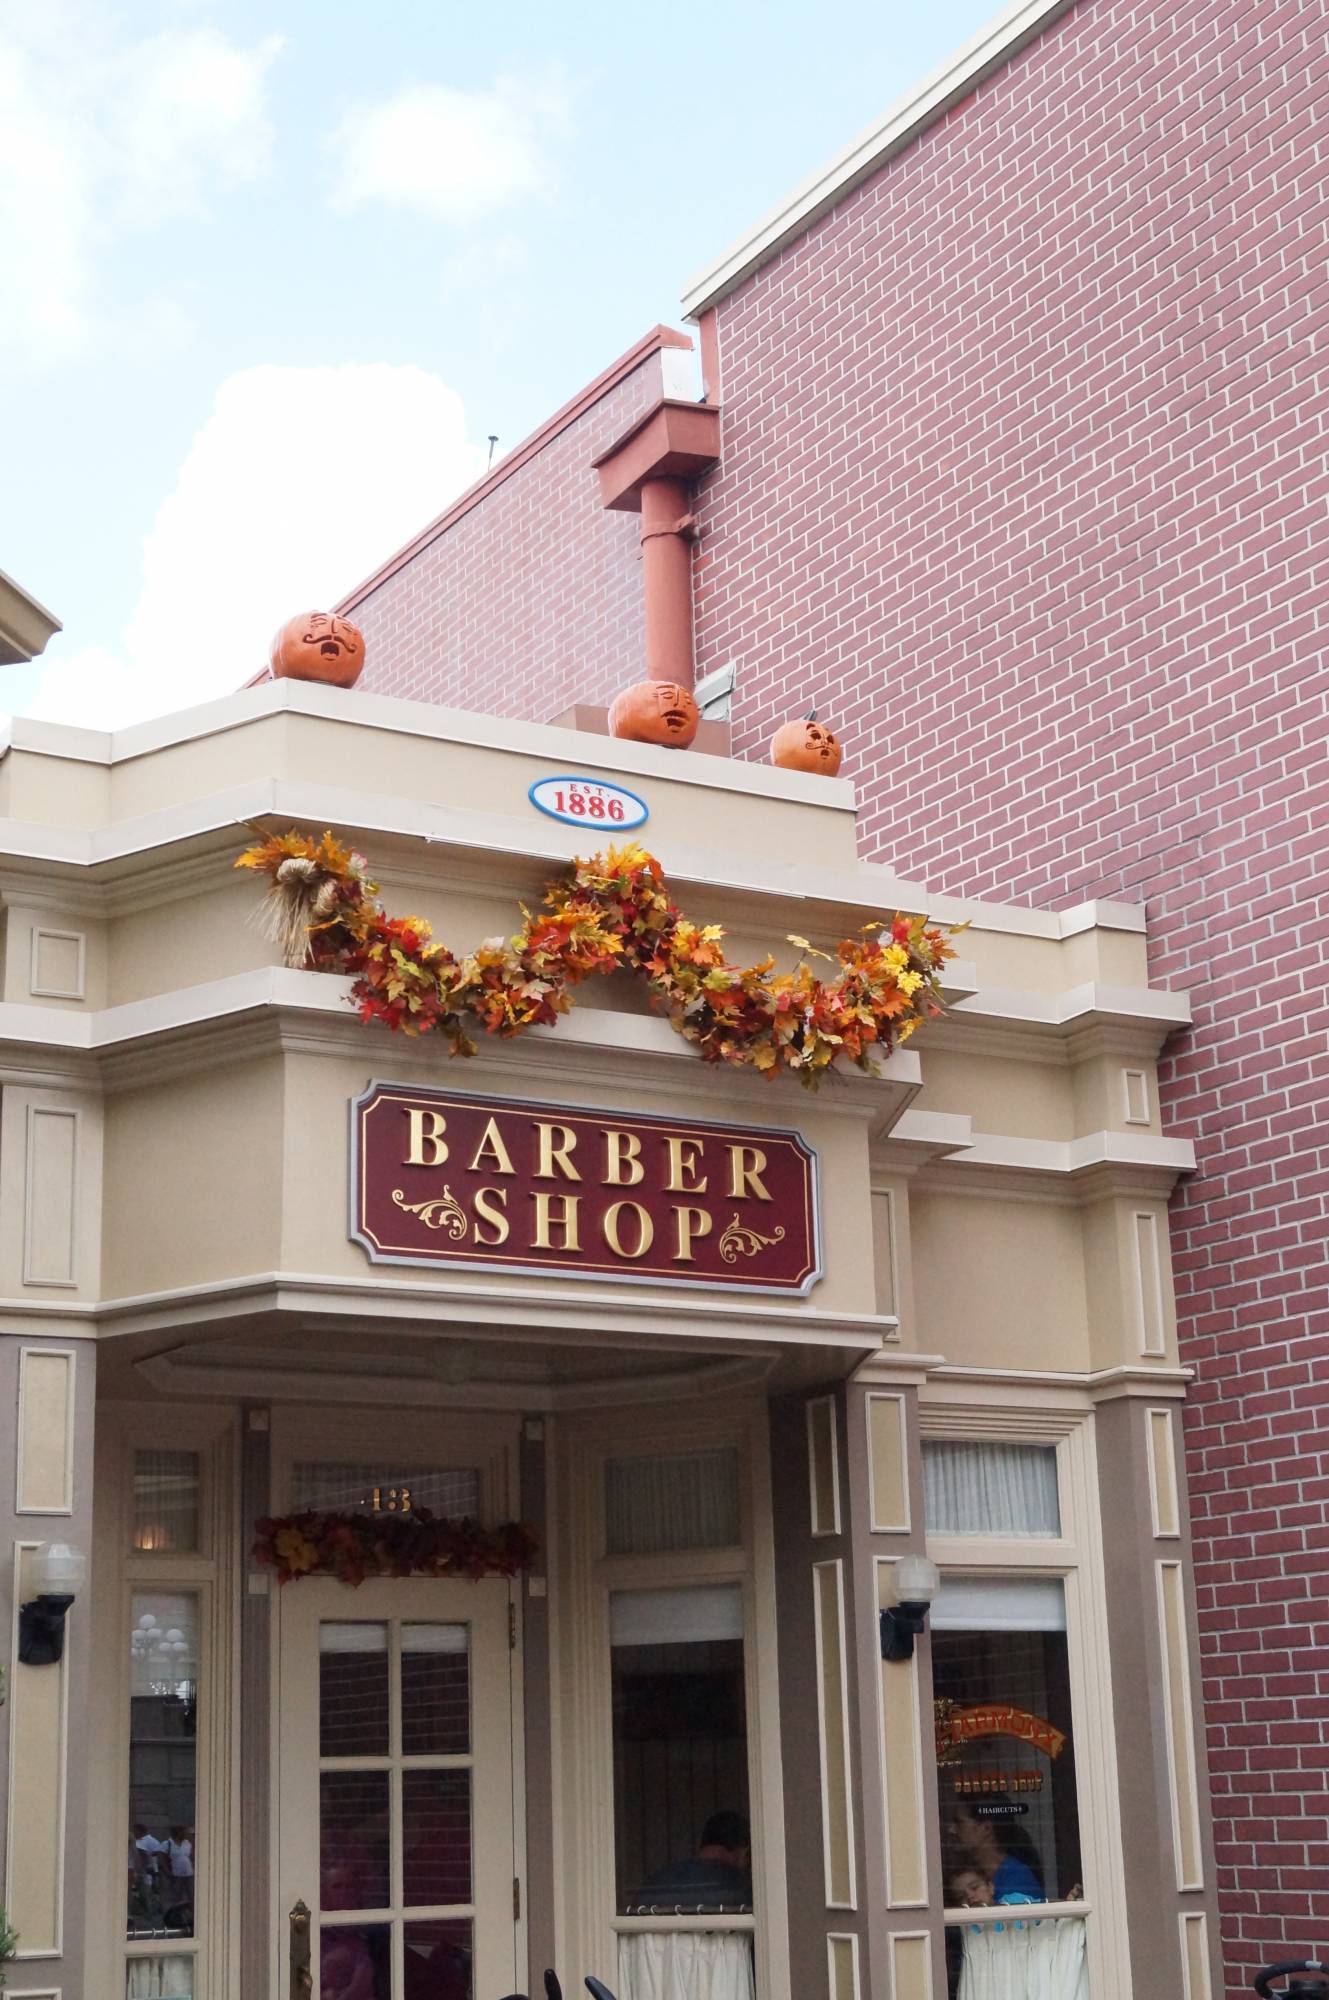 Little ones can get their first haircut at the Harmony Barber Shop in the Magic Kingdom | PassPorter.com